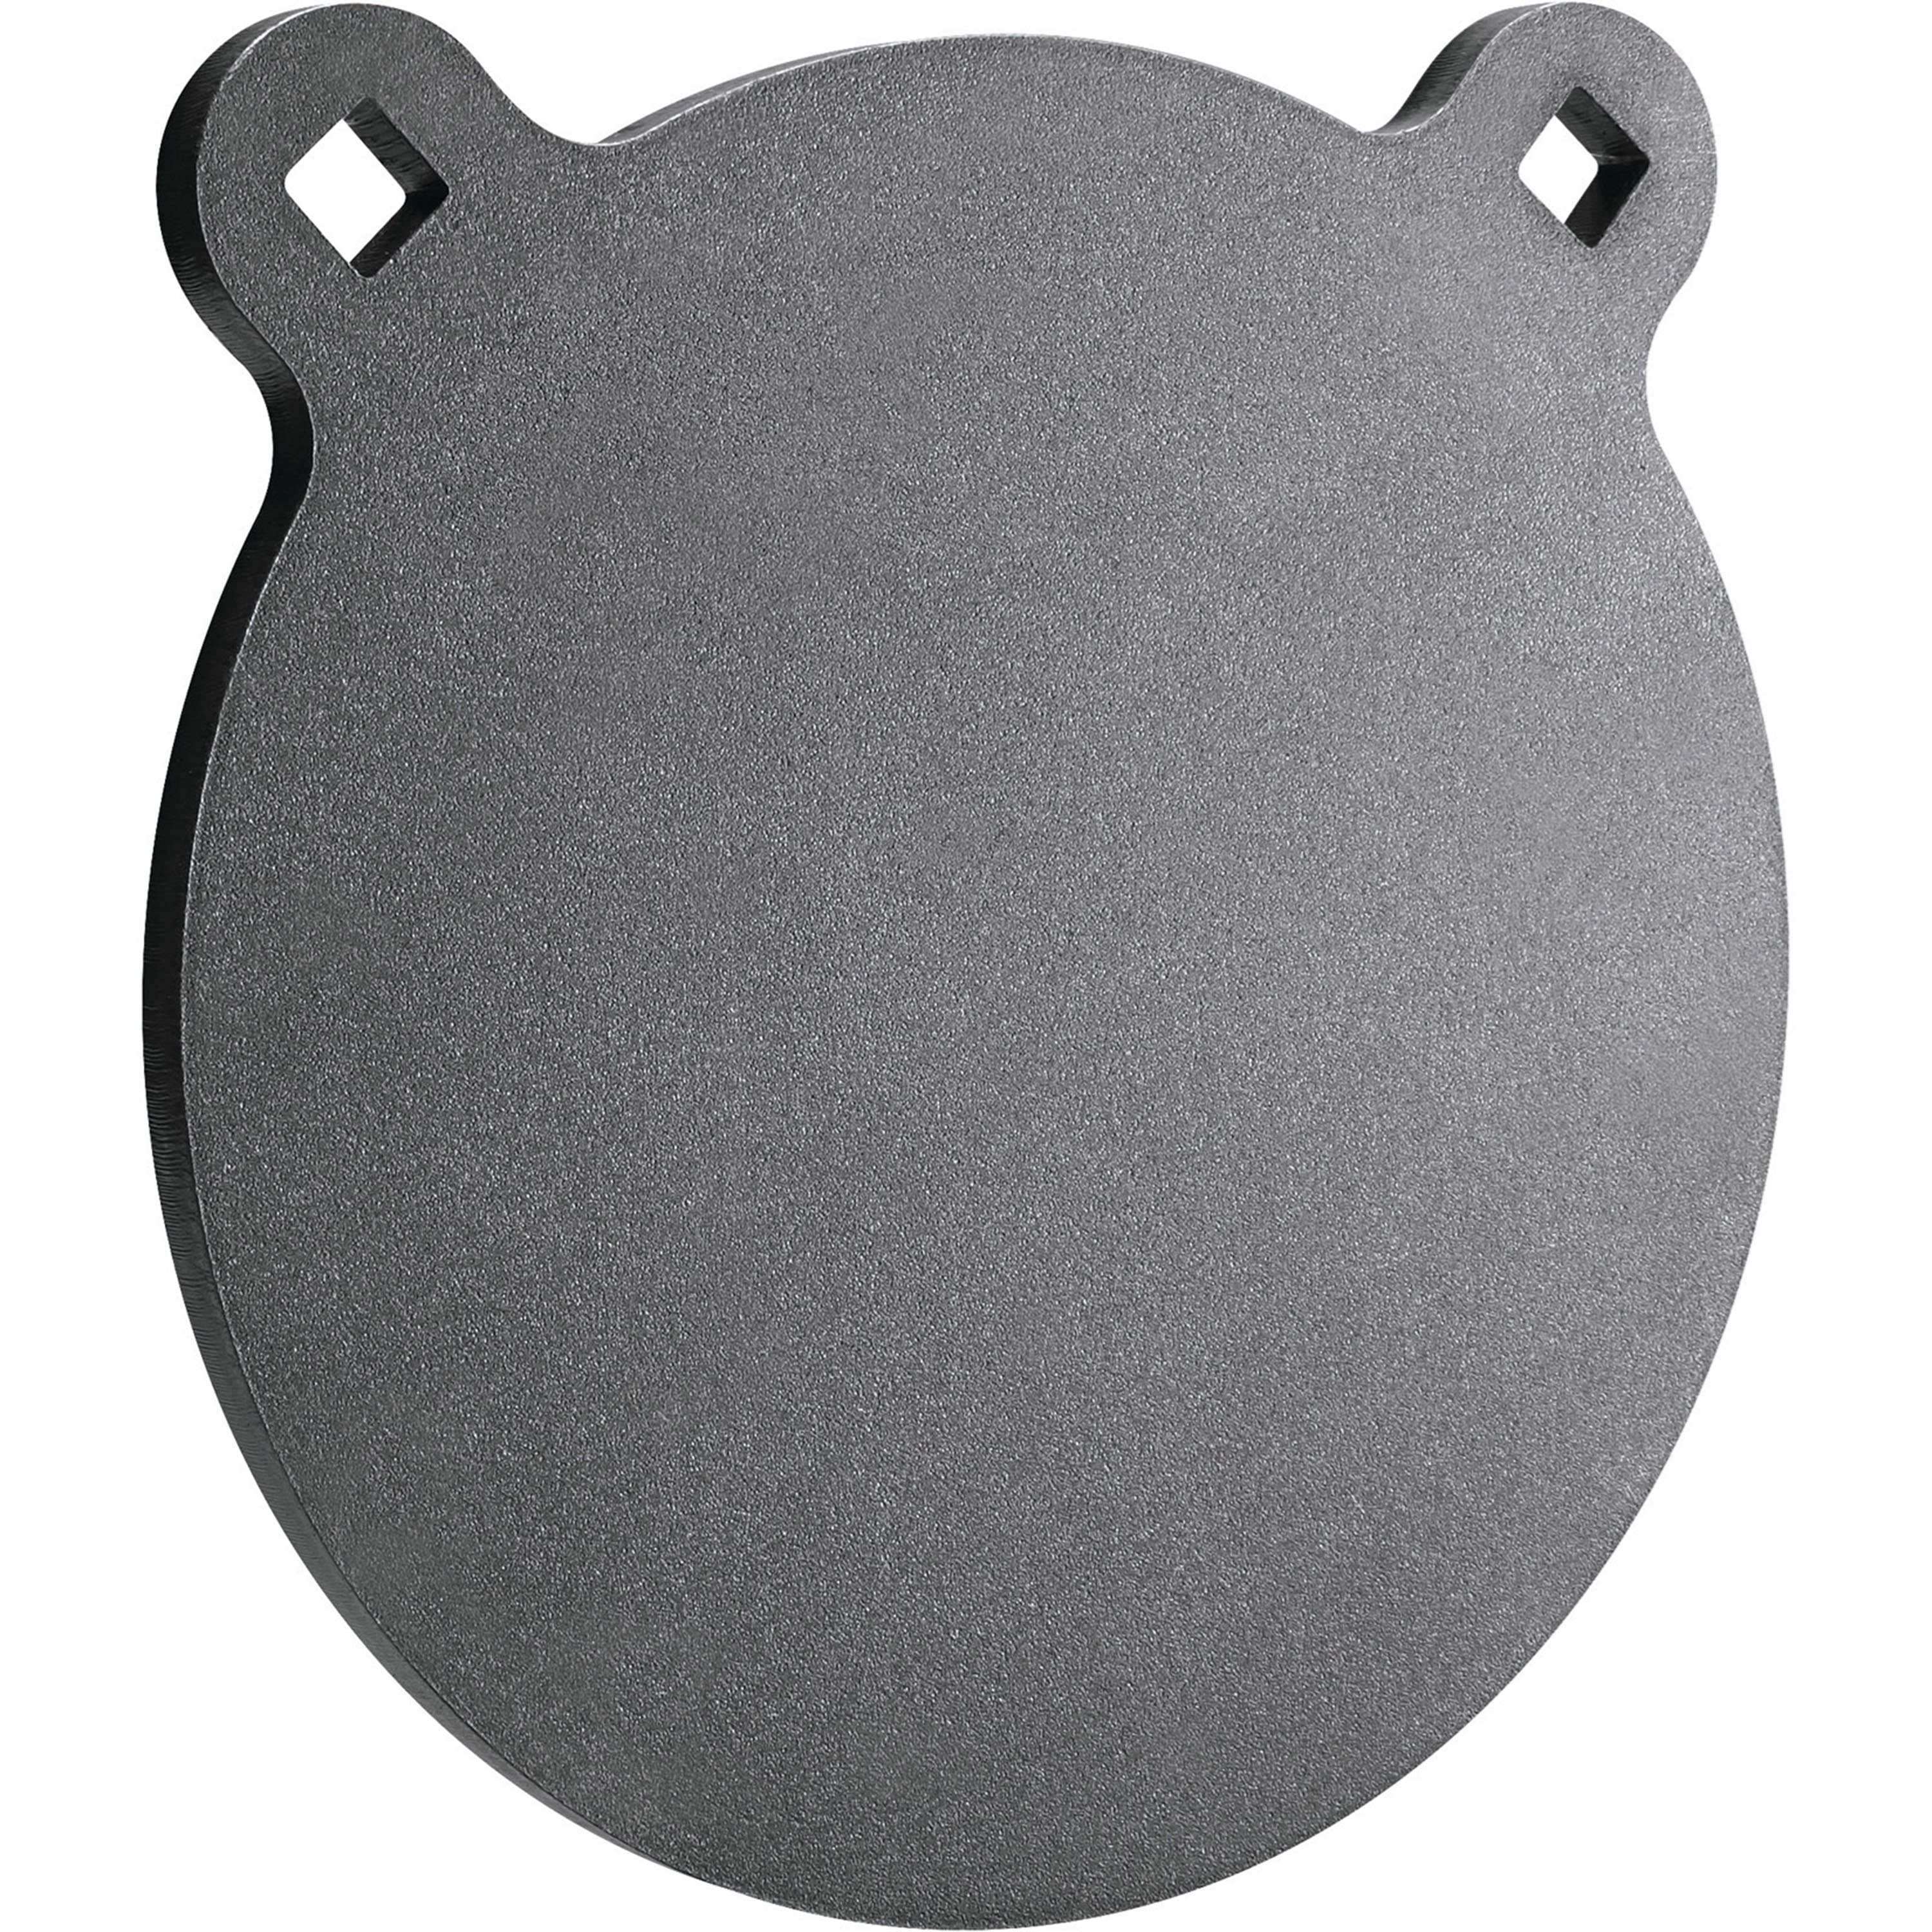 Steel Target Practice Plate 4ct Details about    High Caliber 1/2" AR500 4"x 4" Gong 